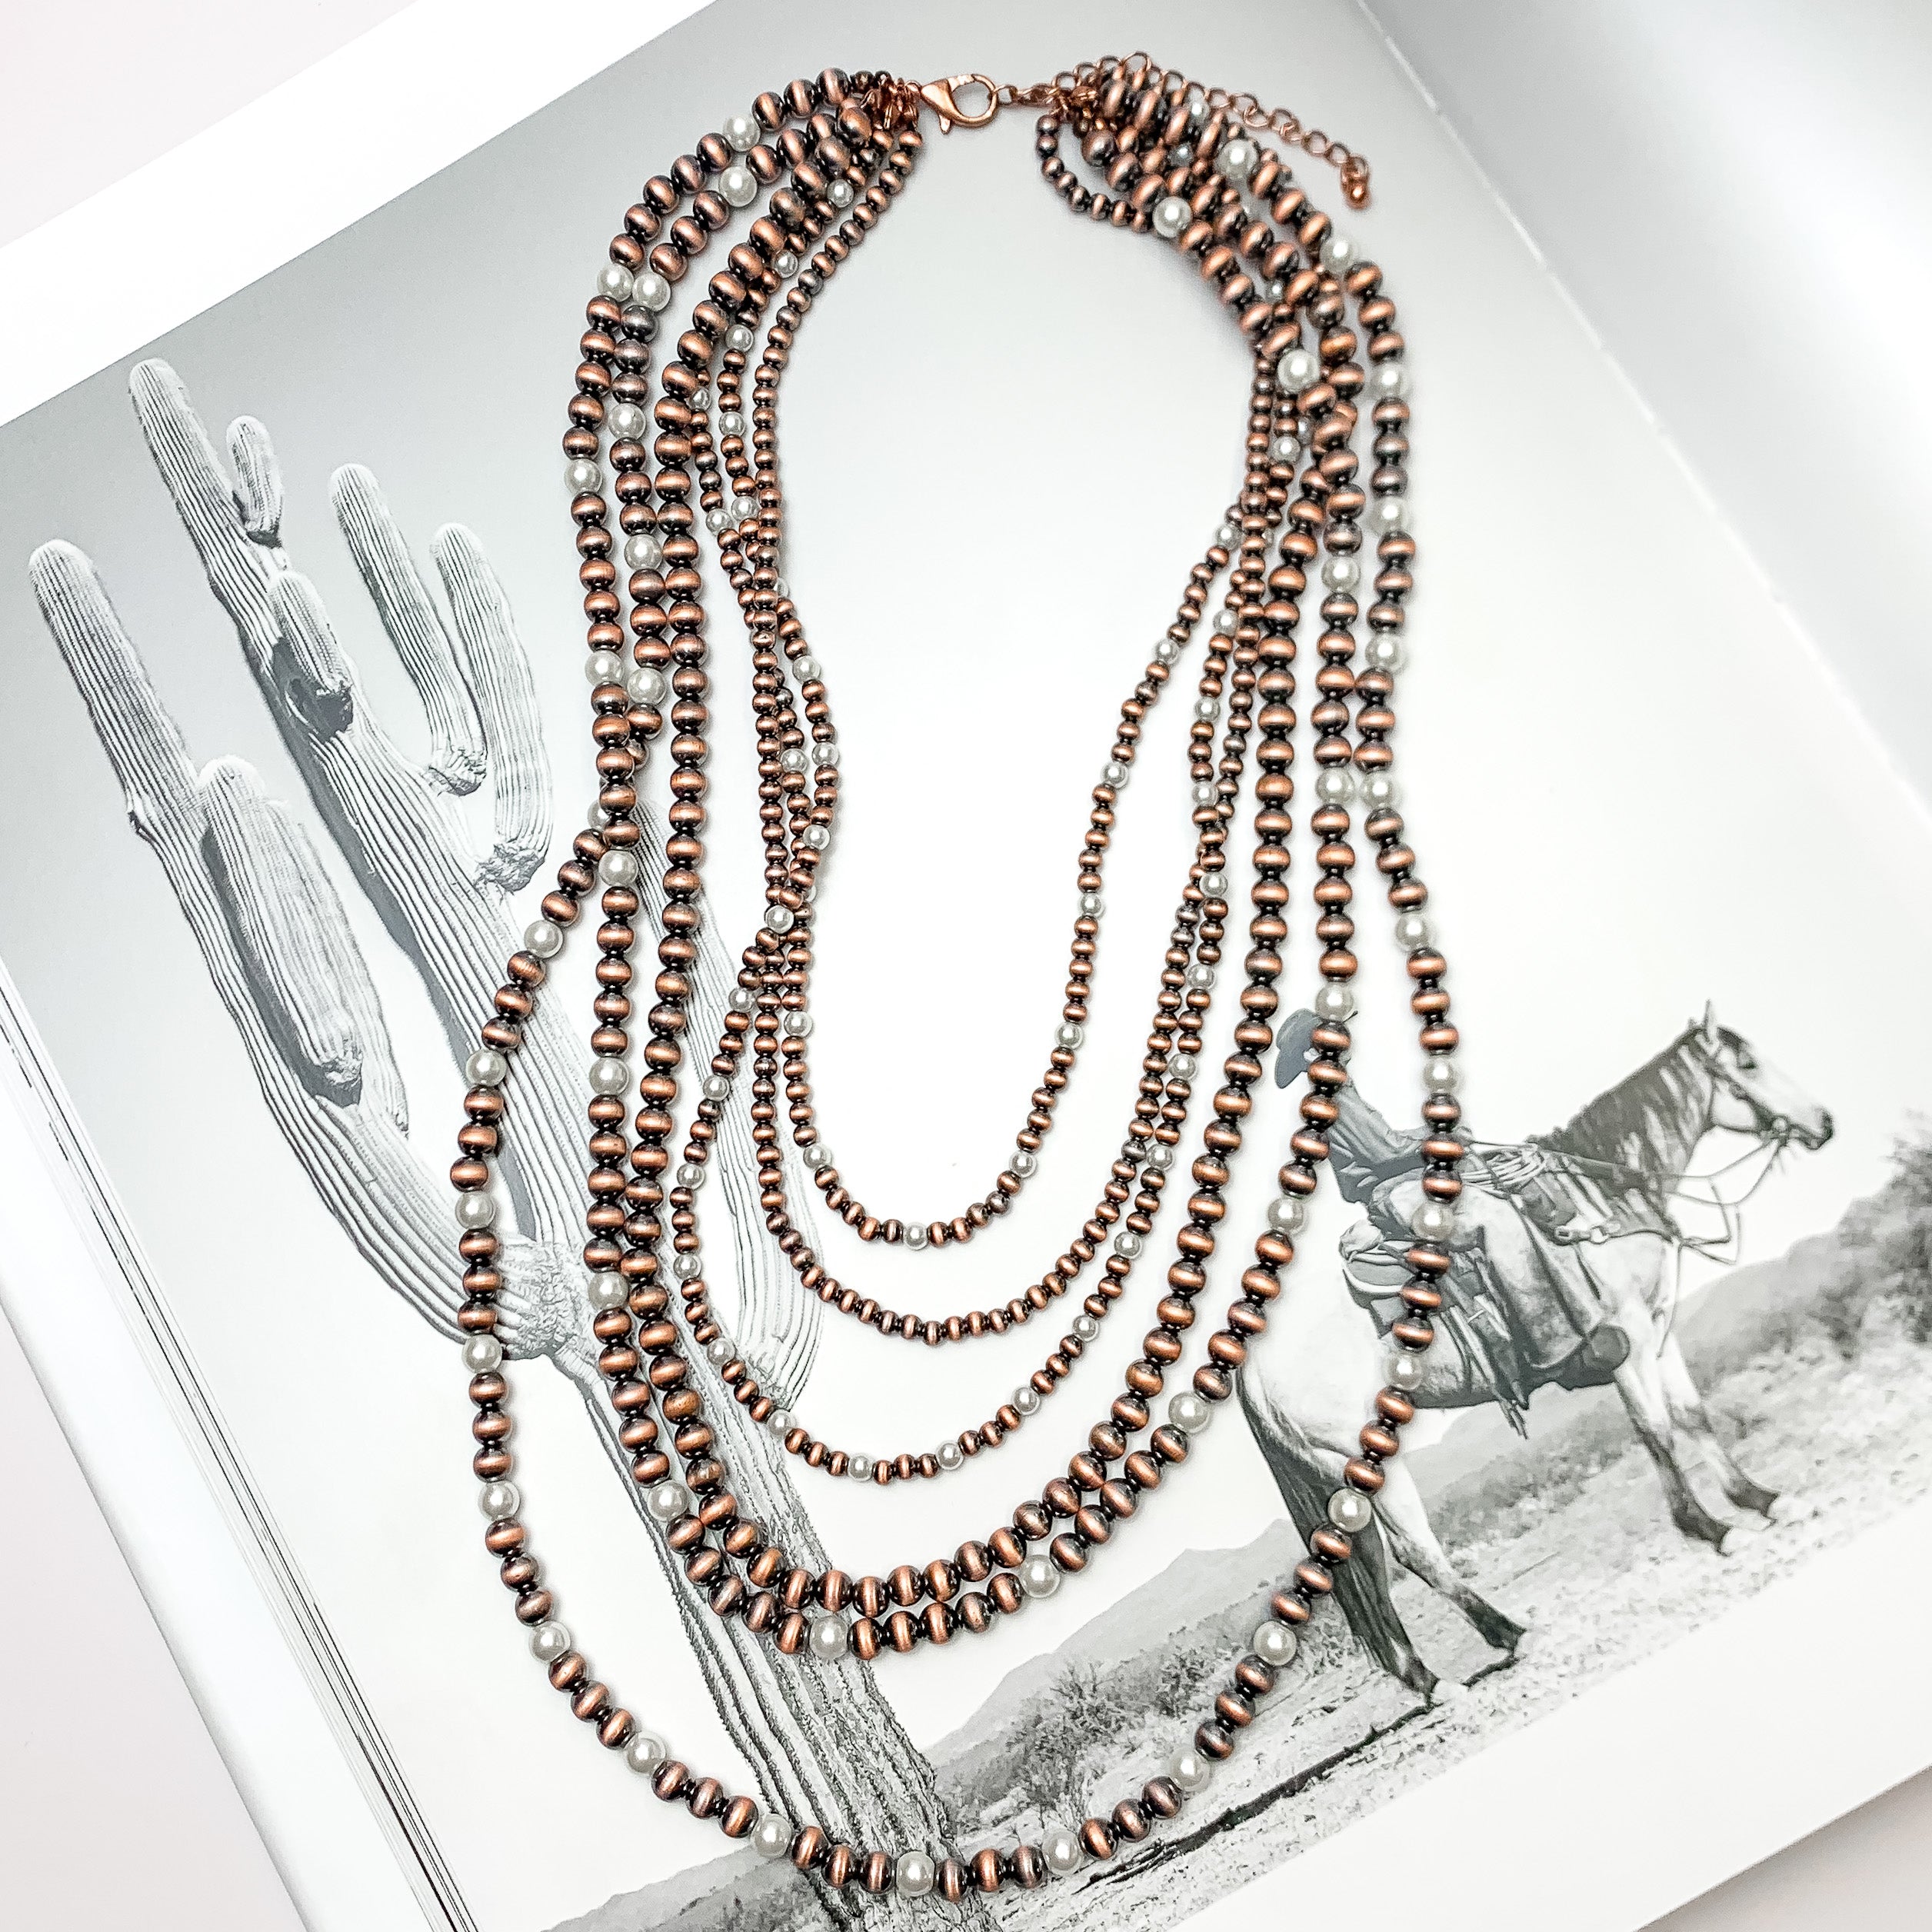 Six Strand Faux Navajo Pearl Necklace in Copper Tone with White Pearl Beads. Pictured on a western background.